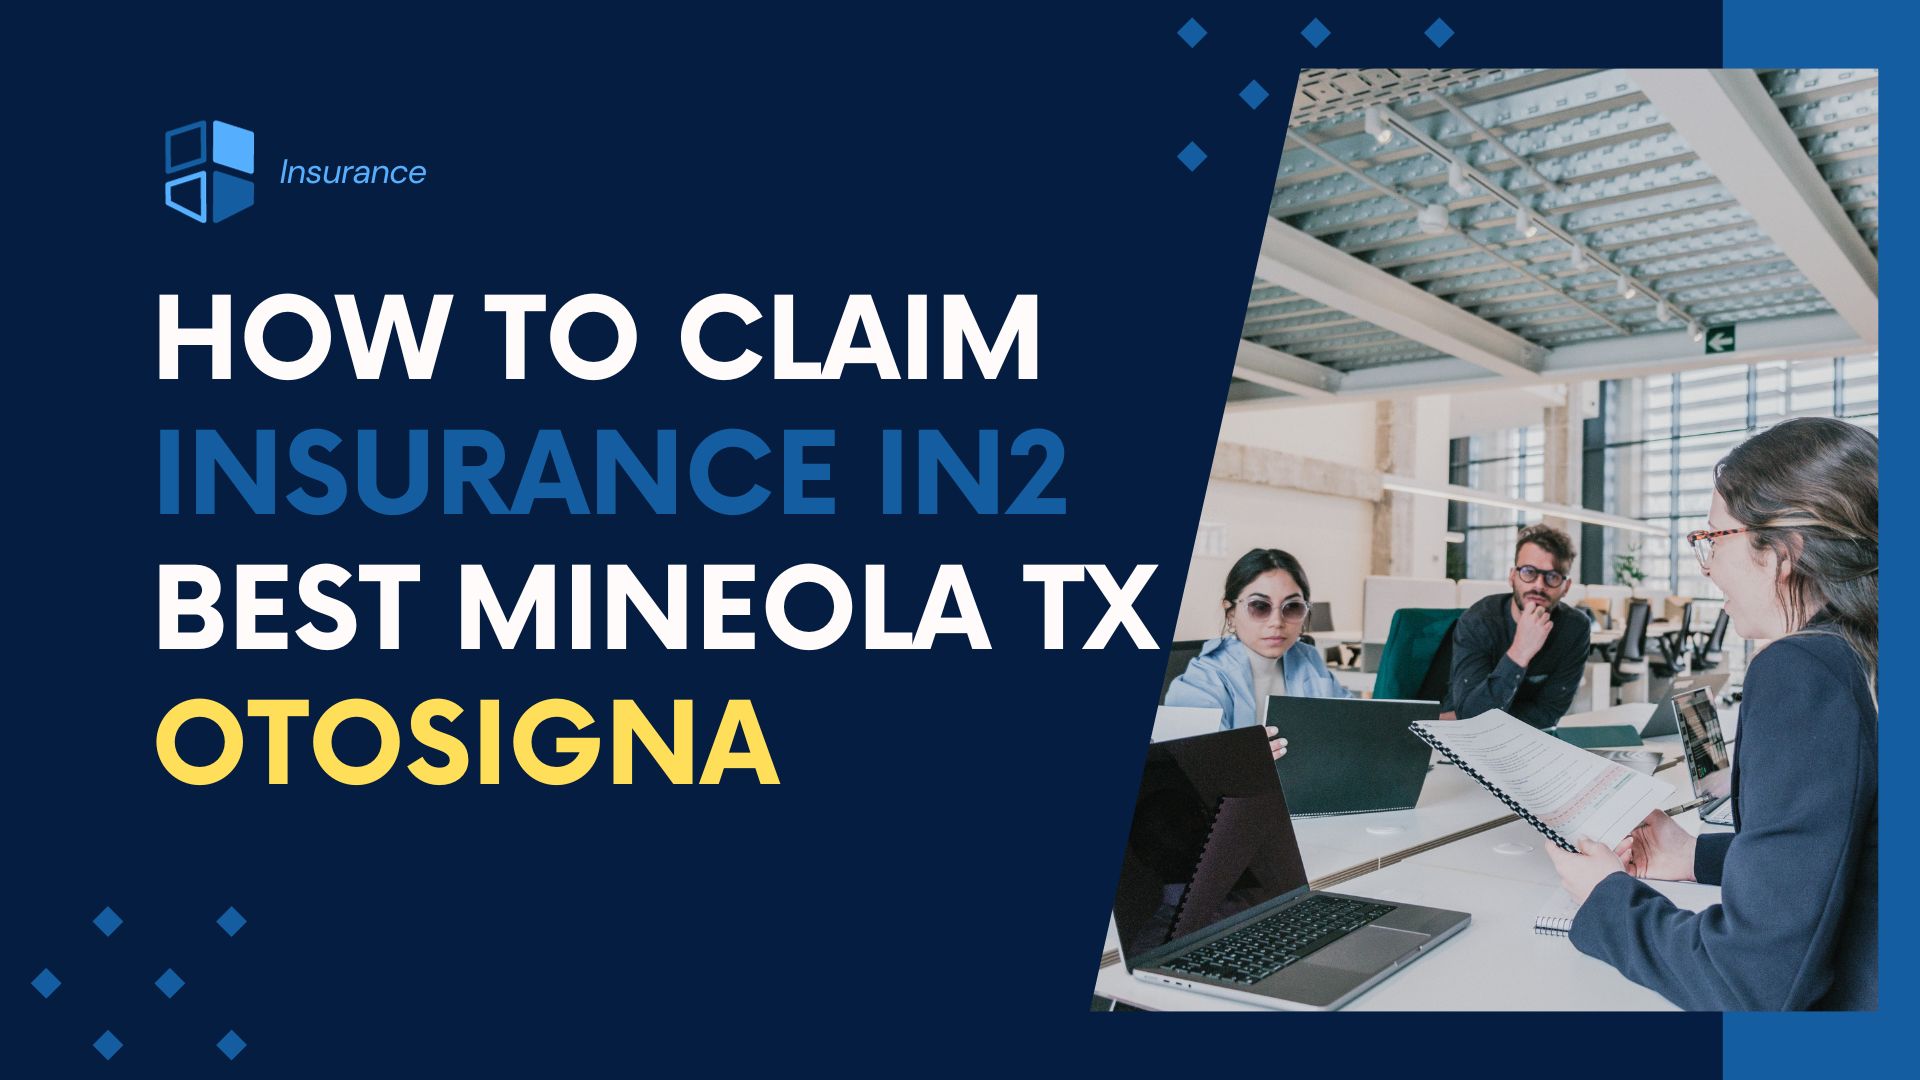 You are currently viewing How to Claim Insurance In2 Best Mineola tx Otosigna